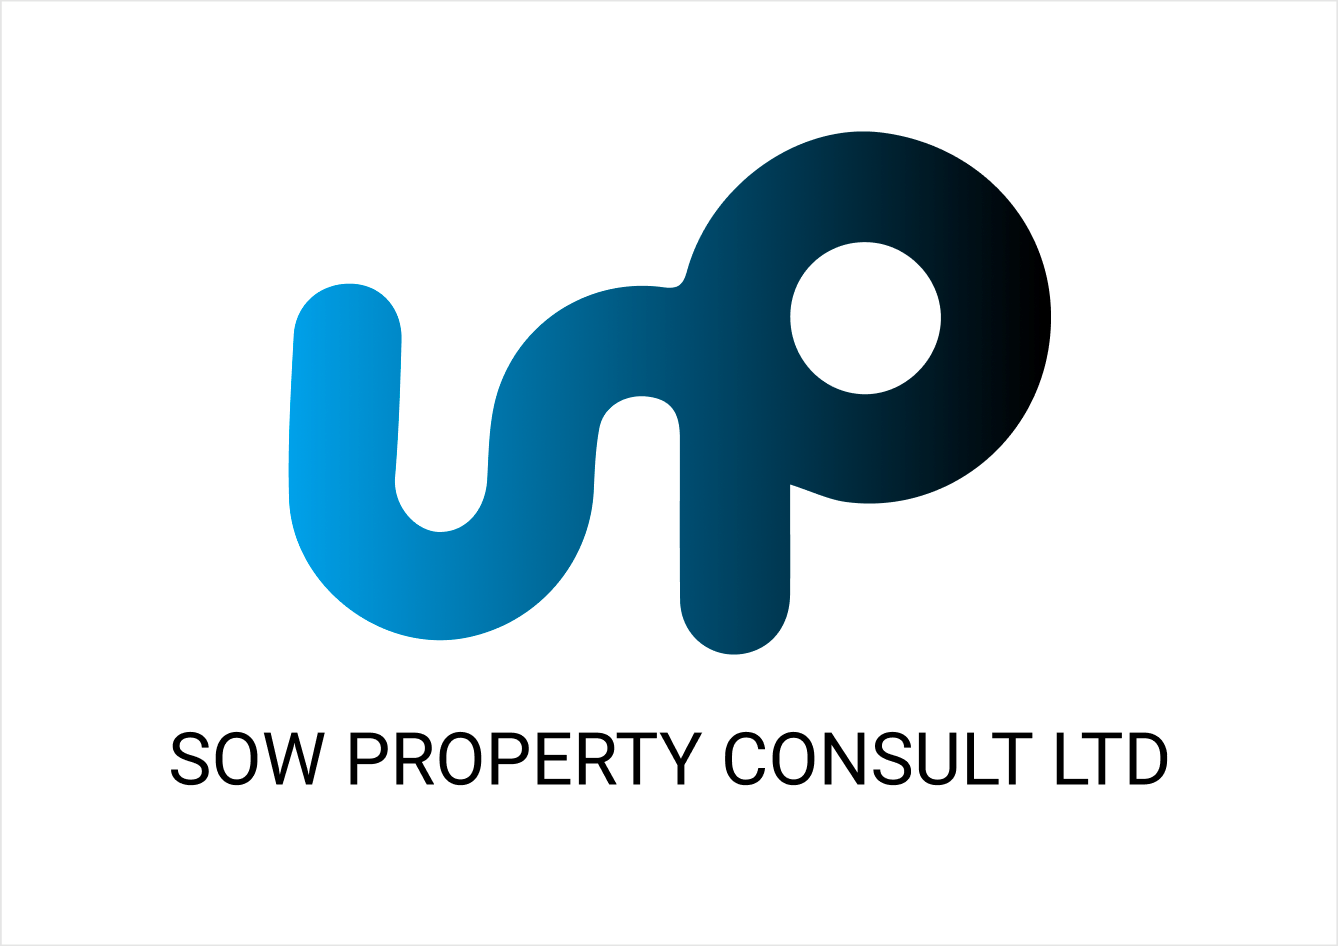 Sow Property Consult Ltd (SPCL)